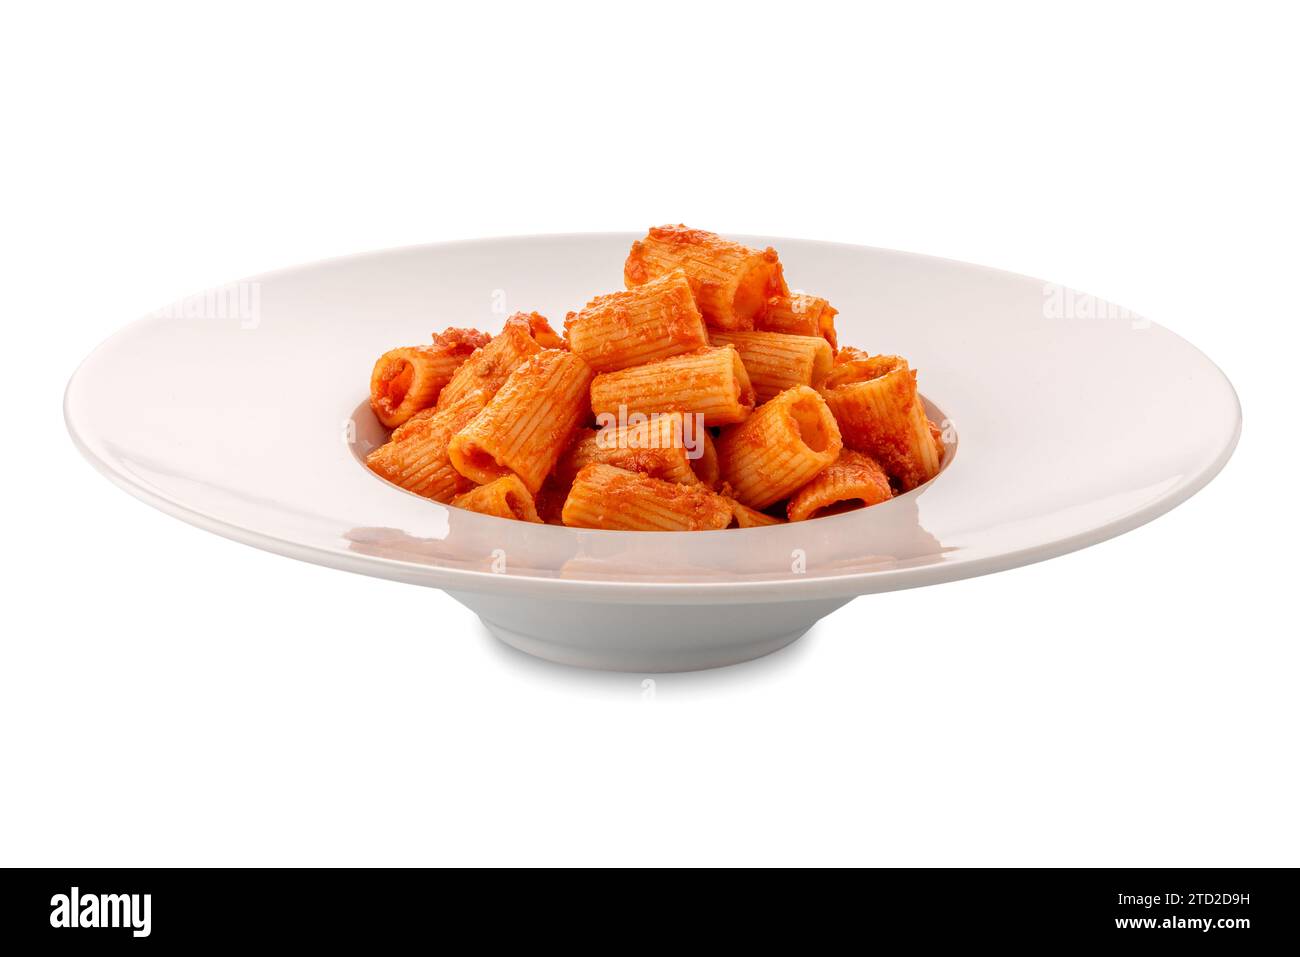 Macaroni mezze maniche pasta topped with tomato sauce ragout in white plate isolated on white with clipping path included Stock Photo